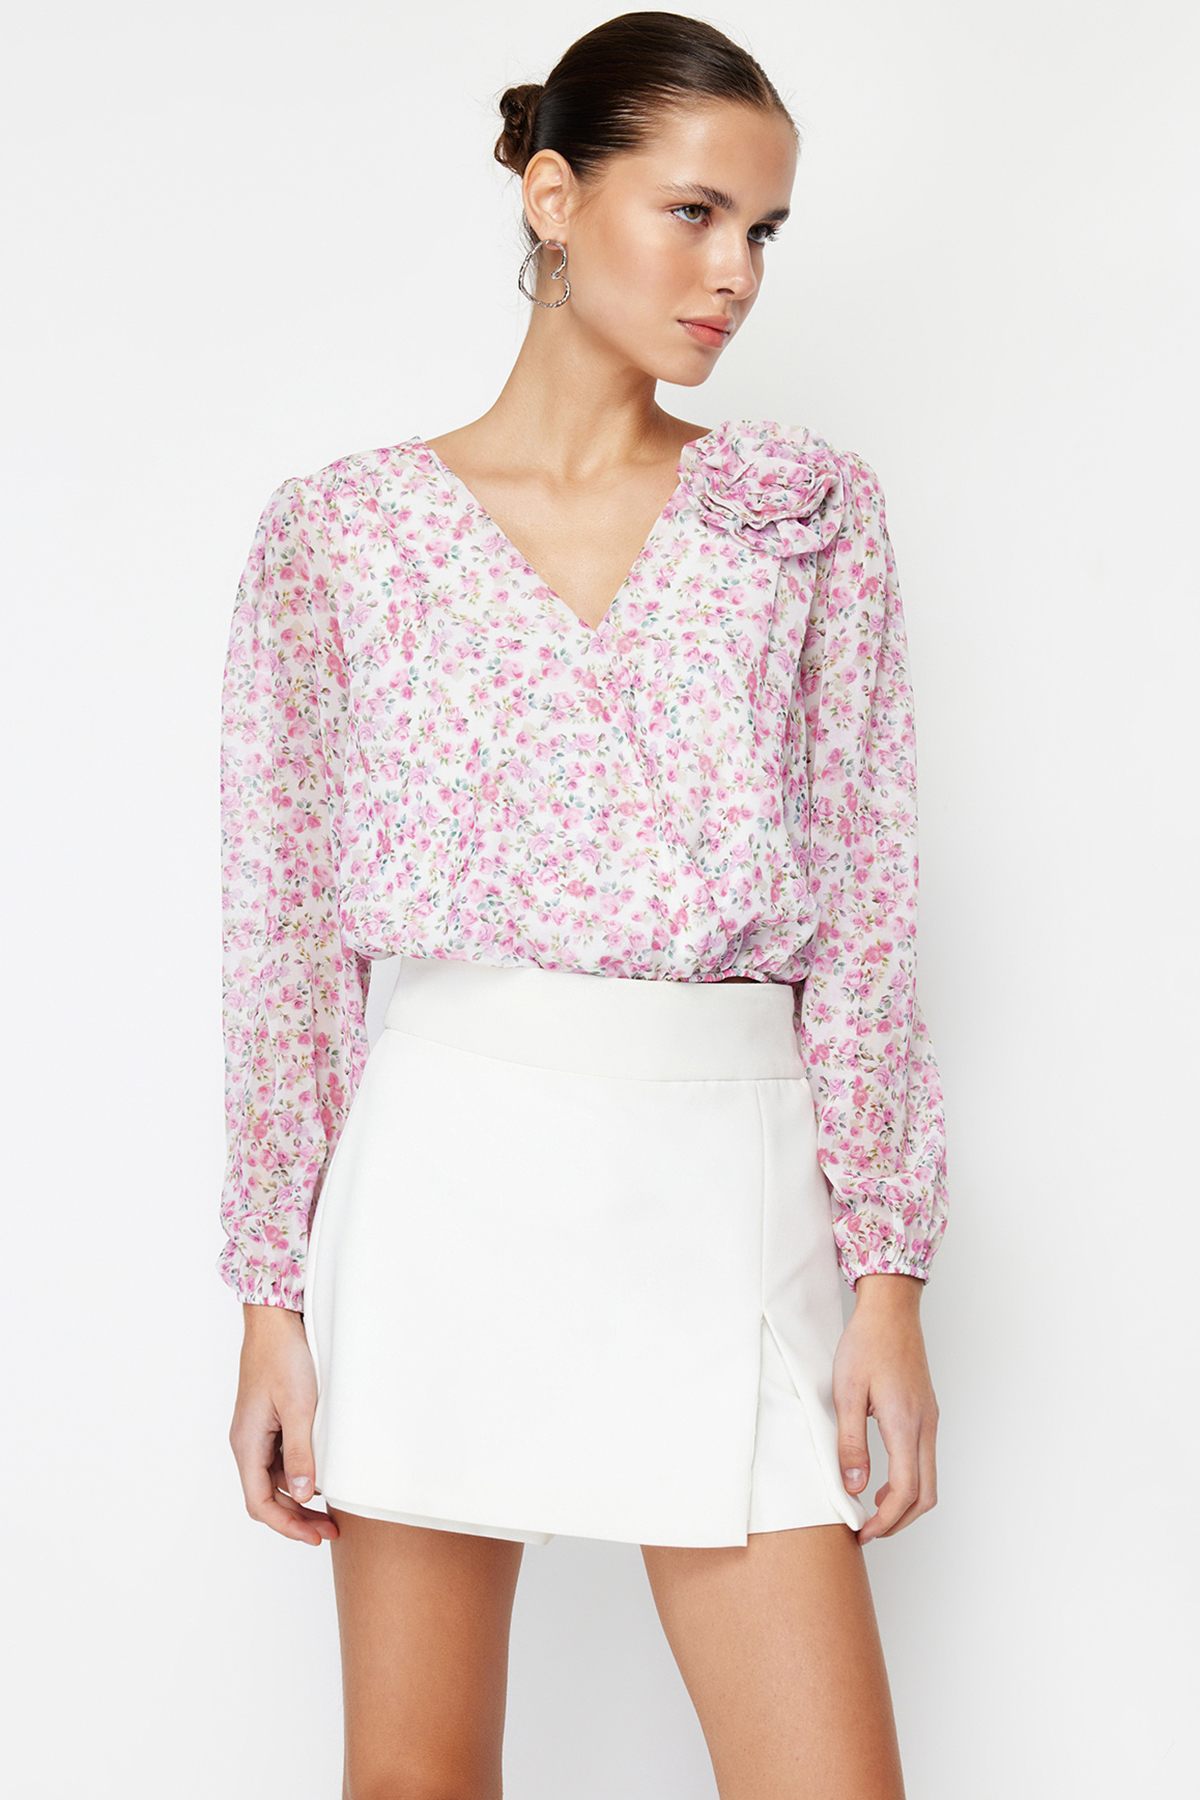 Trendyol Pink Crop Lined Rose Detailed Floral Chiffon Woven Blouse